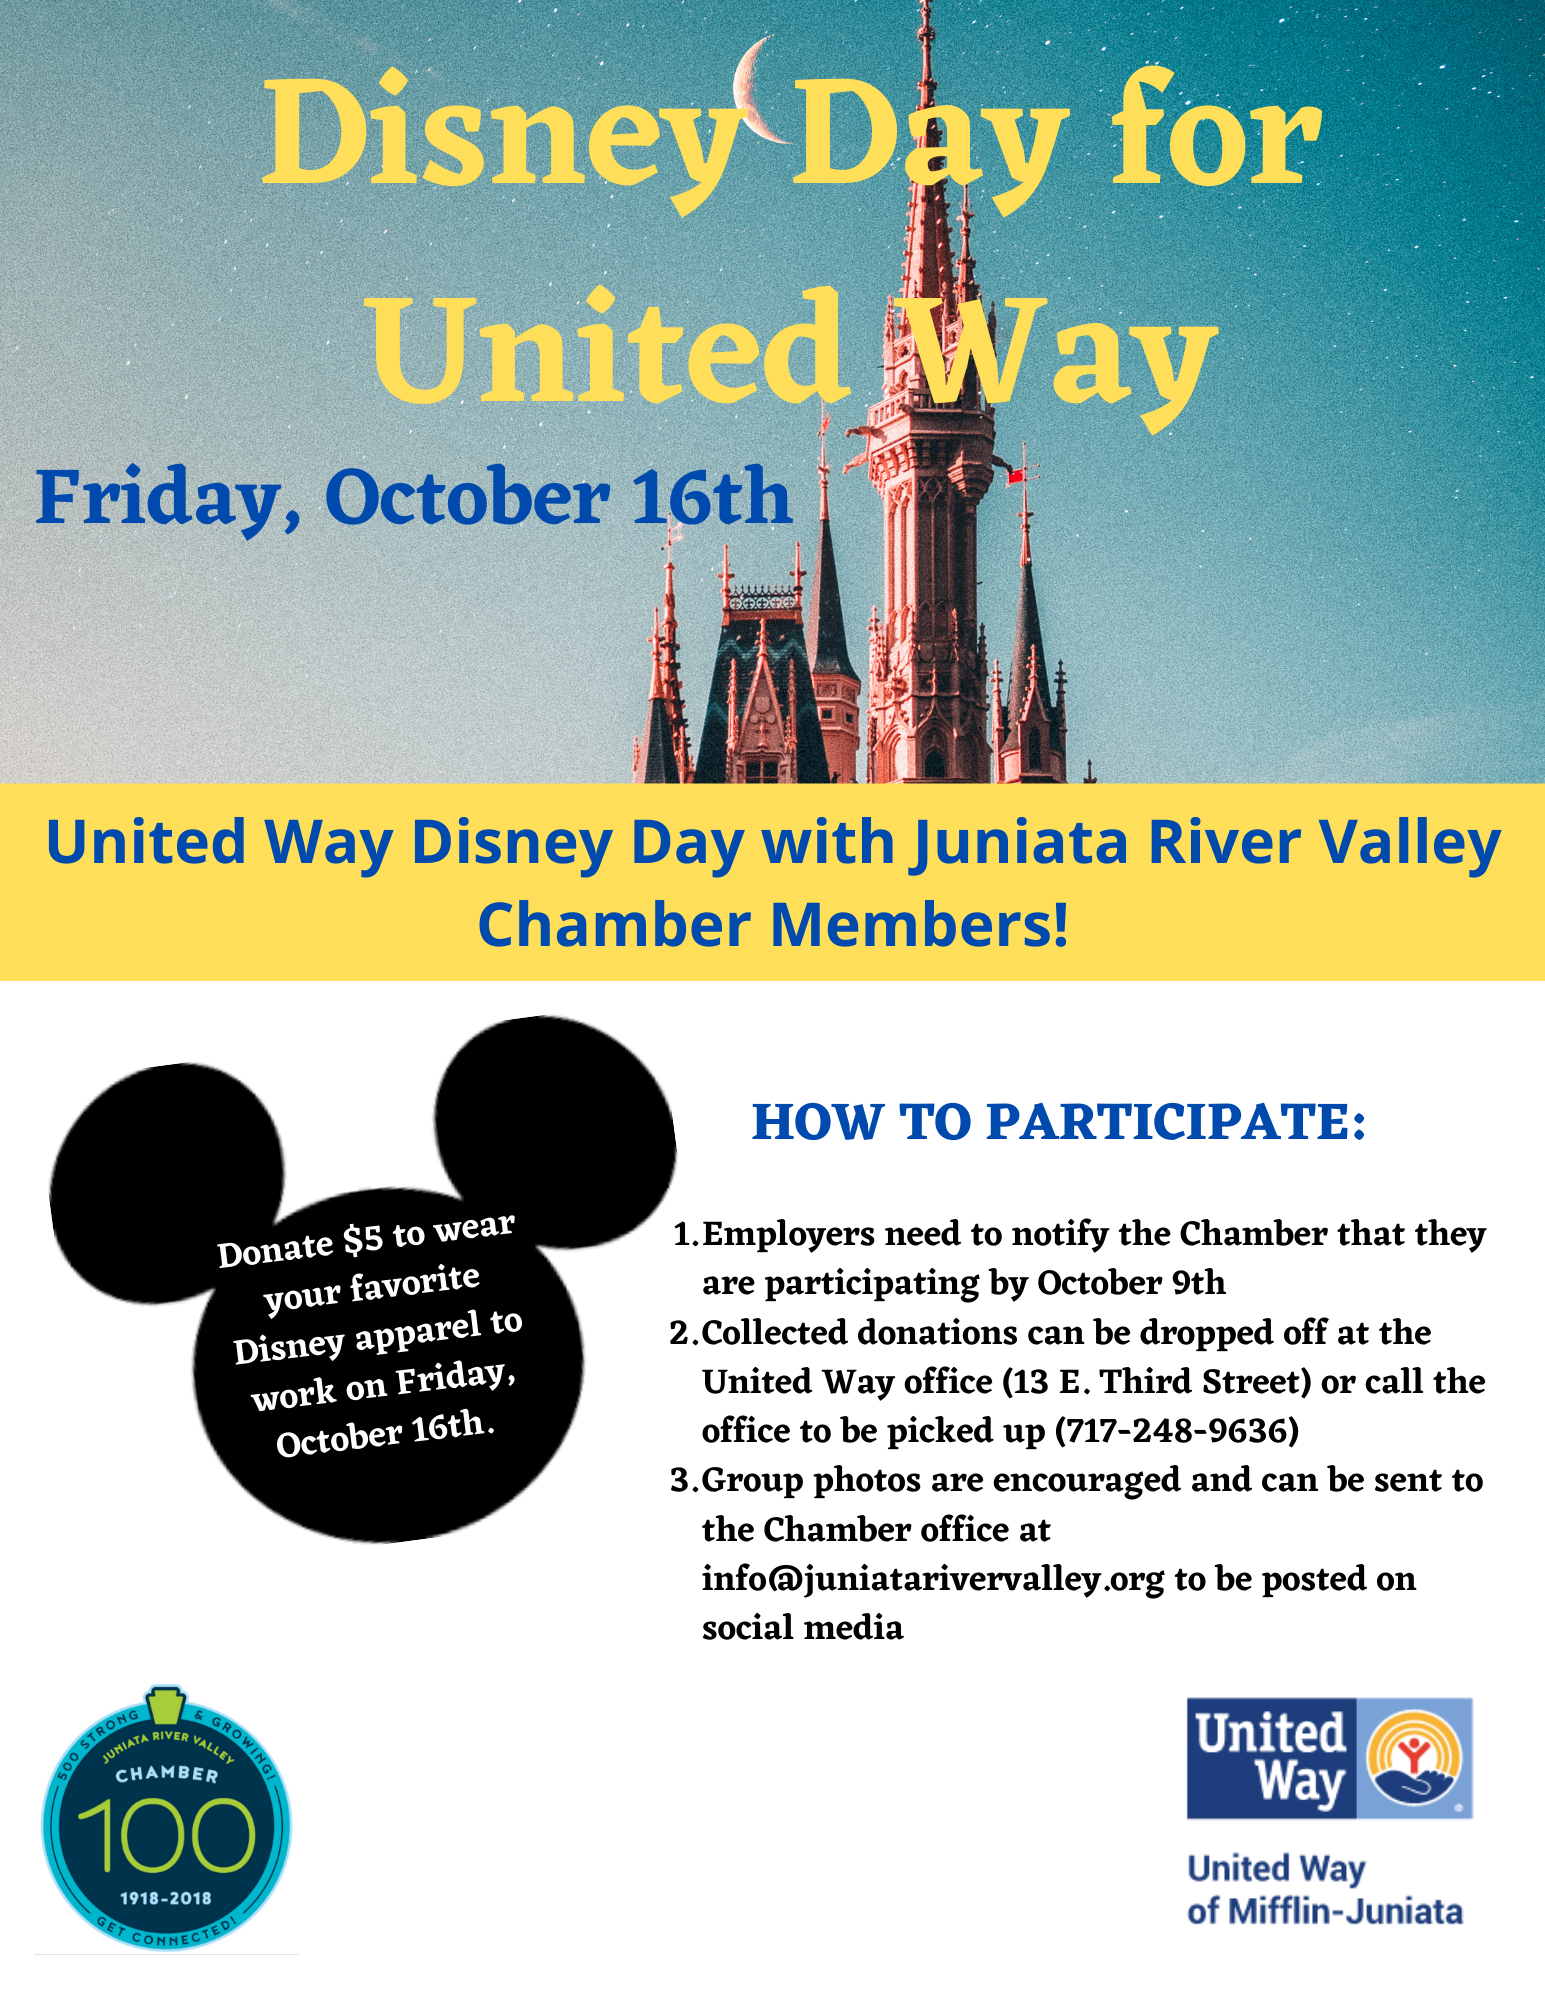 Disney Day for United Way